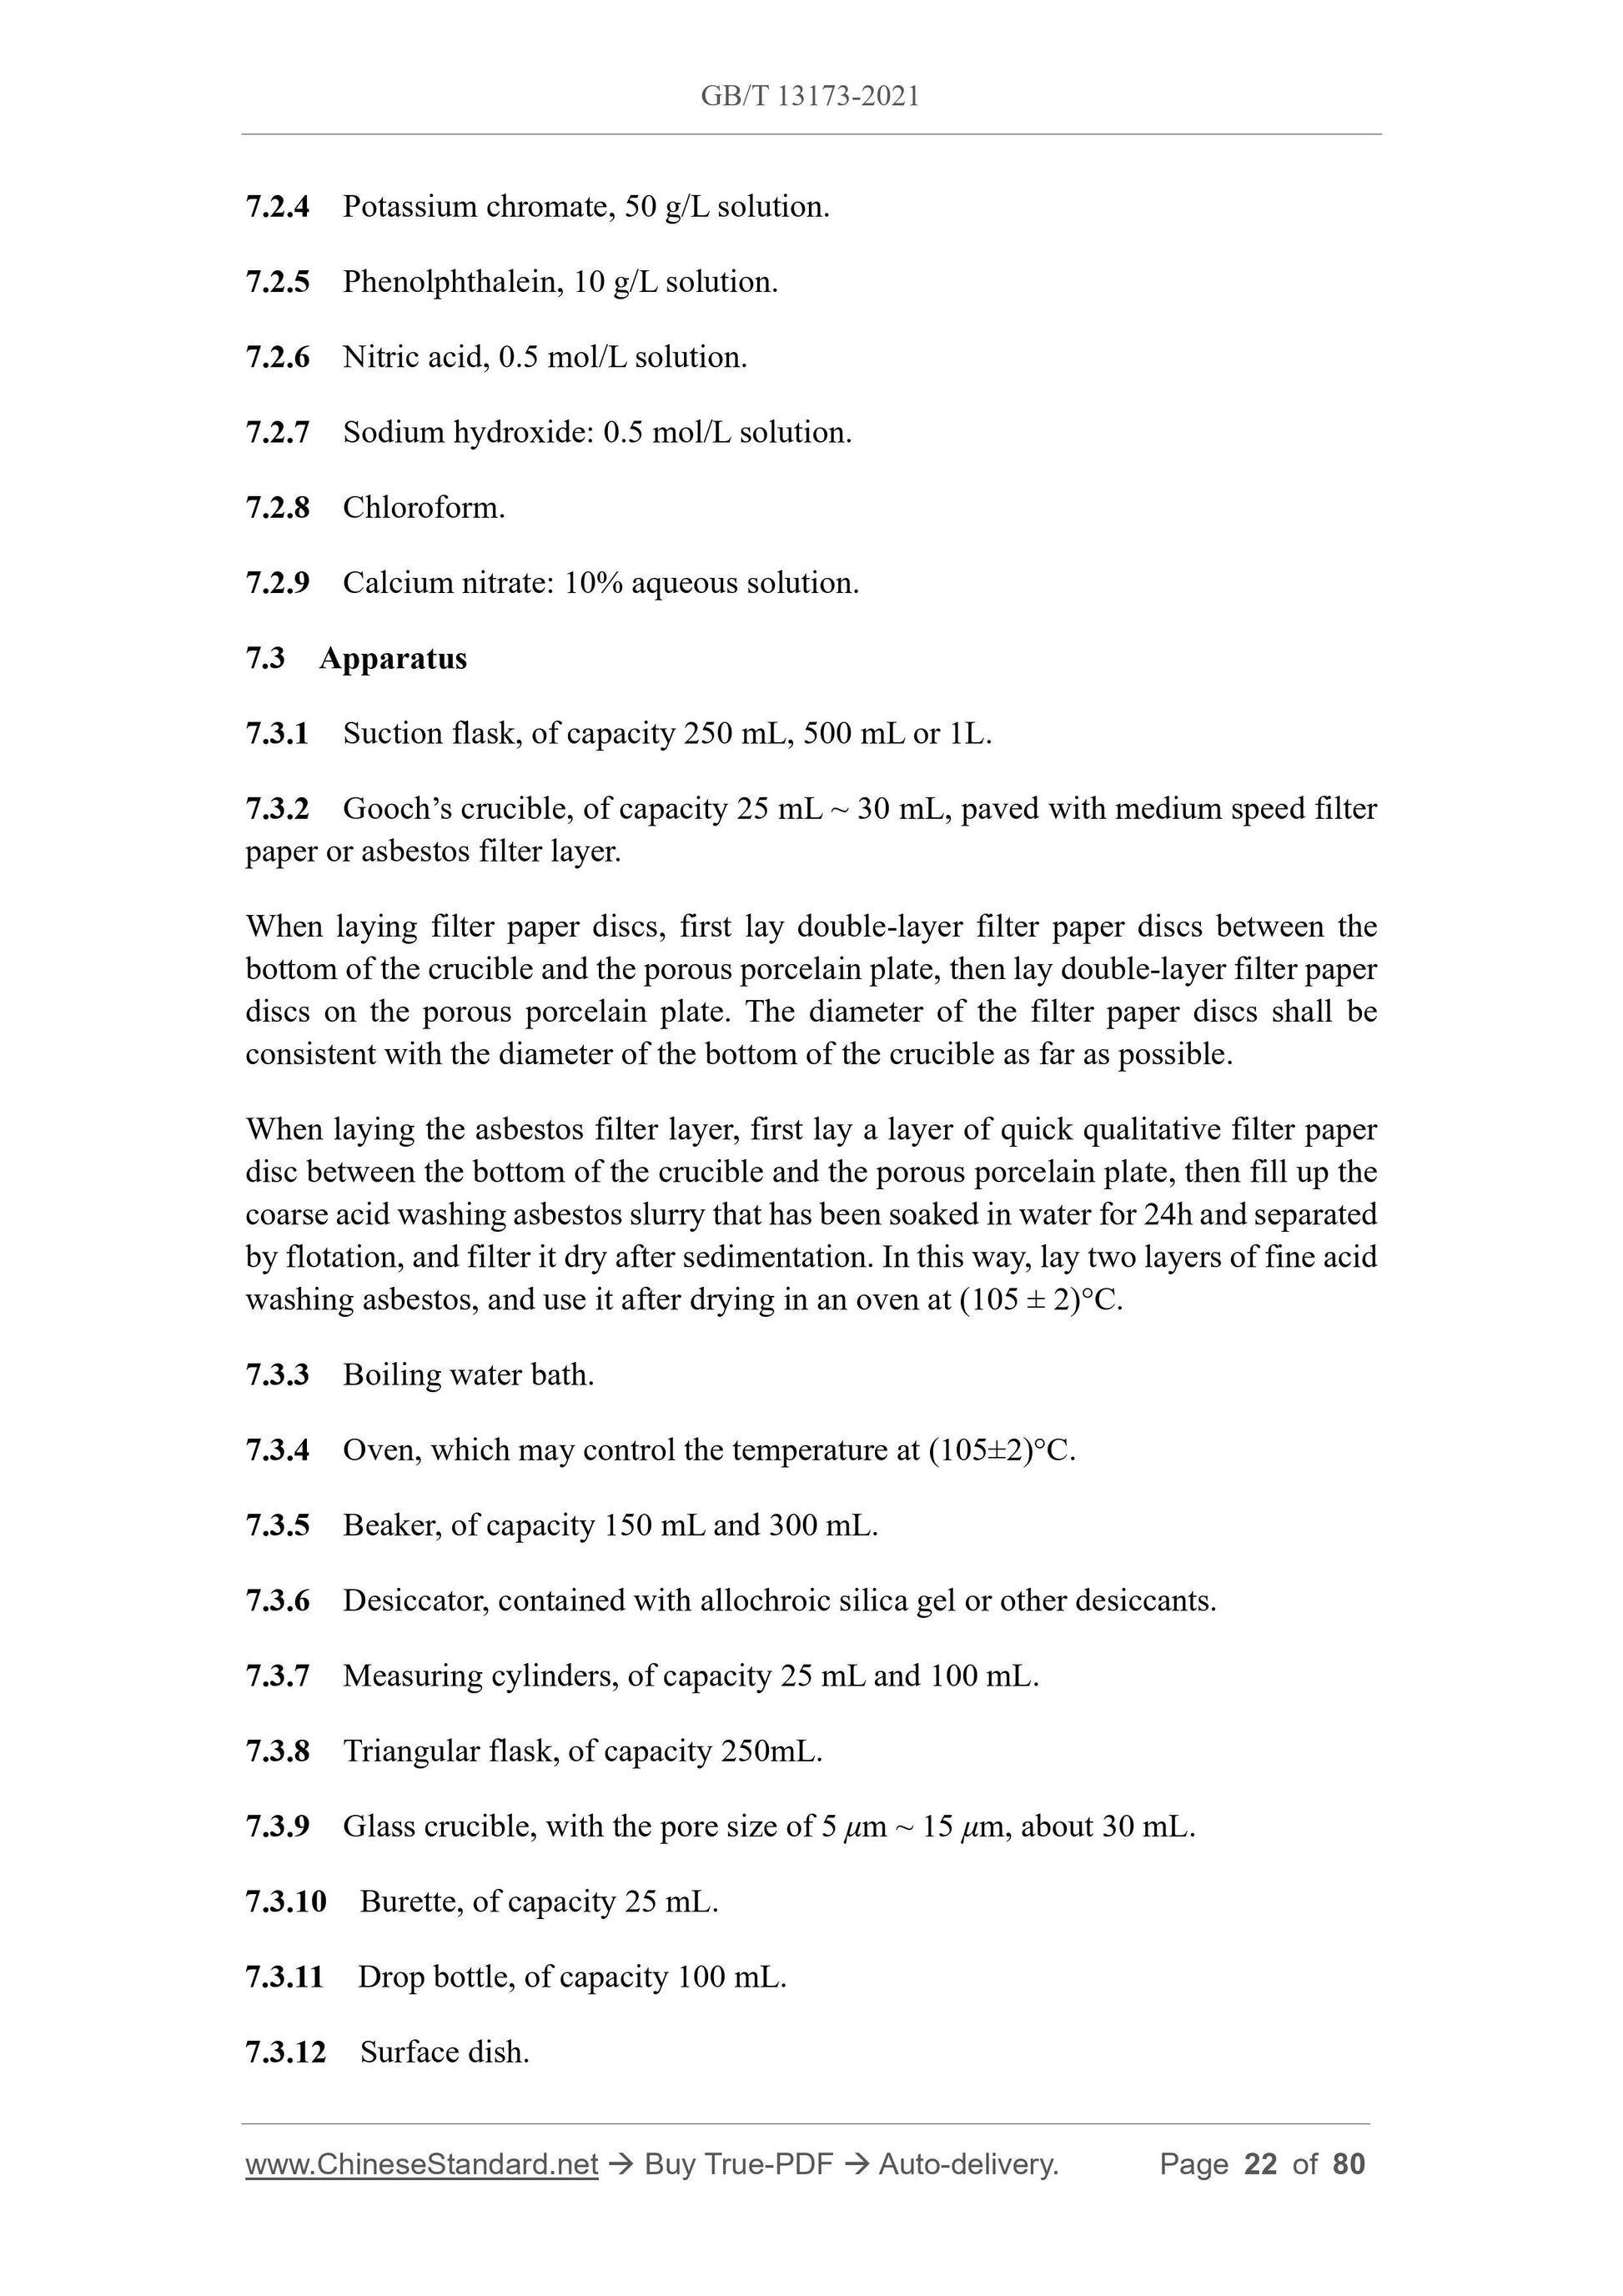 GB/T 13173-2021 Page 10